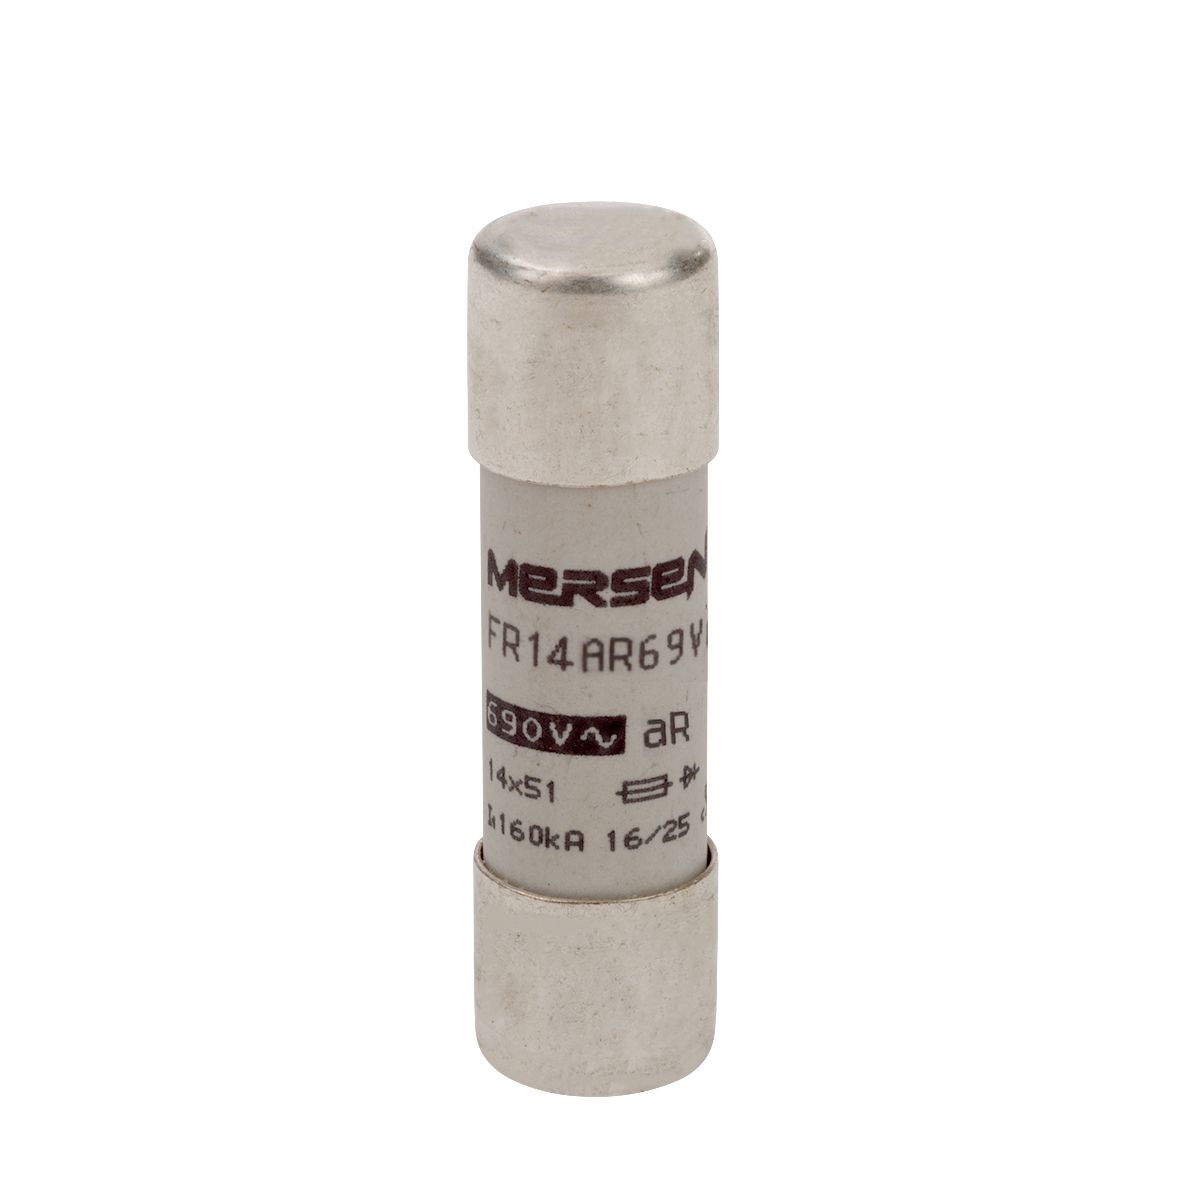 T1027335 - Cylindrical fuse-link aR 690VAC 14x51, 63A, without indicator